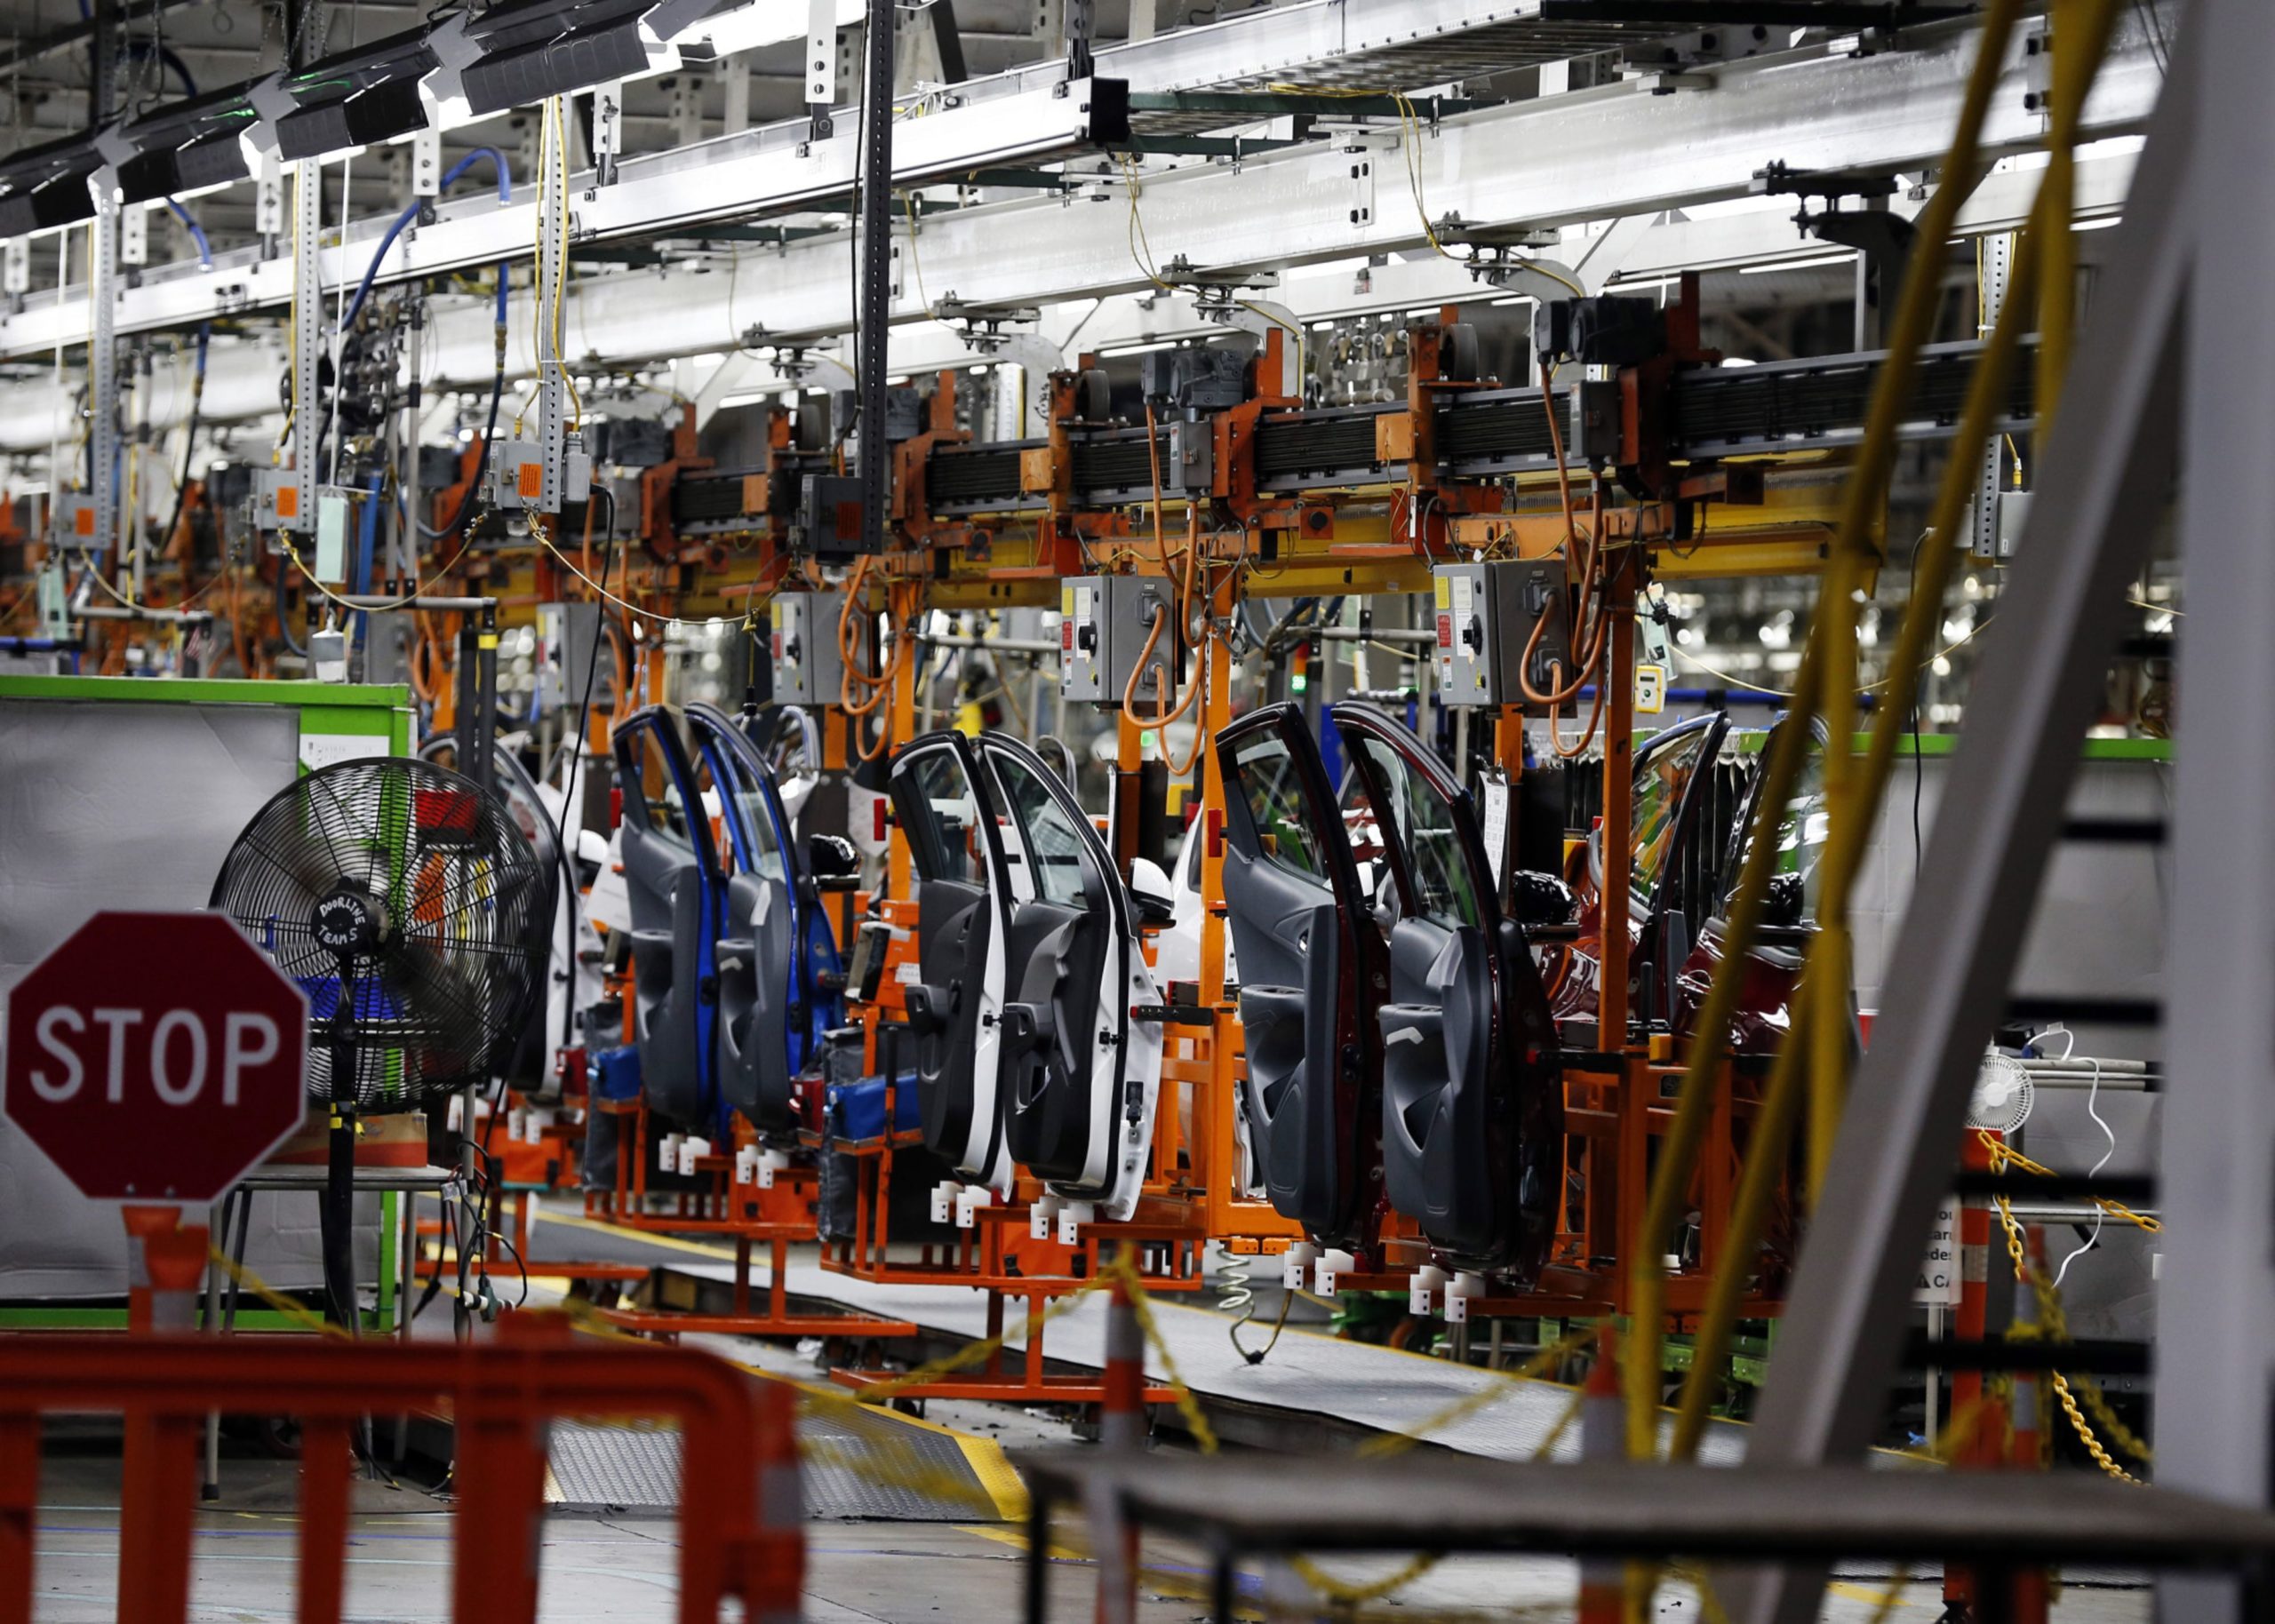 Vehicles move along the production line at the General Motors Co. Orion Assembly Plant in Orion Township, Michigan, U.S., on Tuesday, June 13, 2017. Photographer: Jeff Kowalsky/Bloomberg